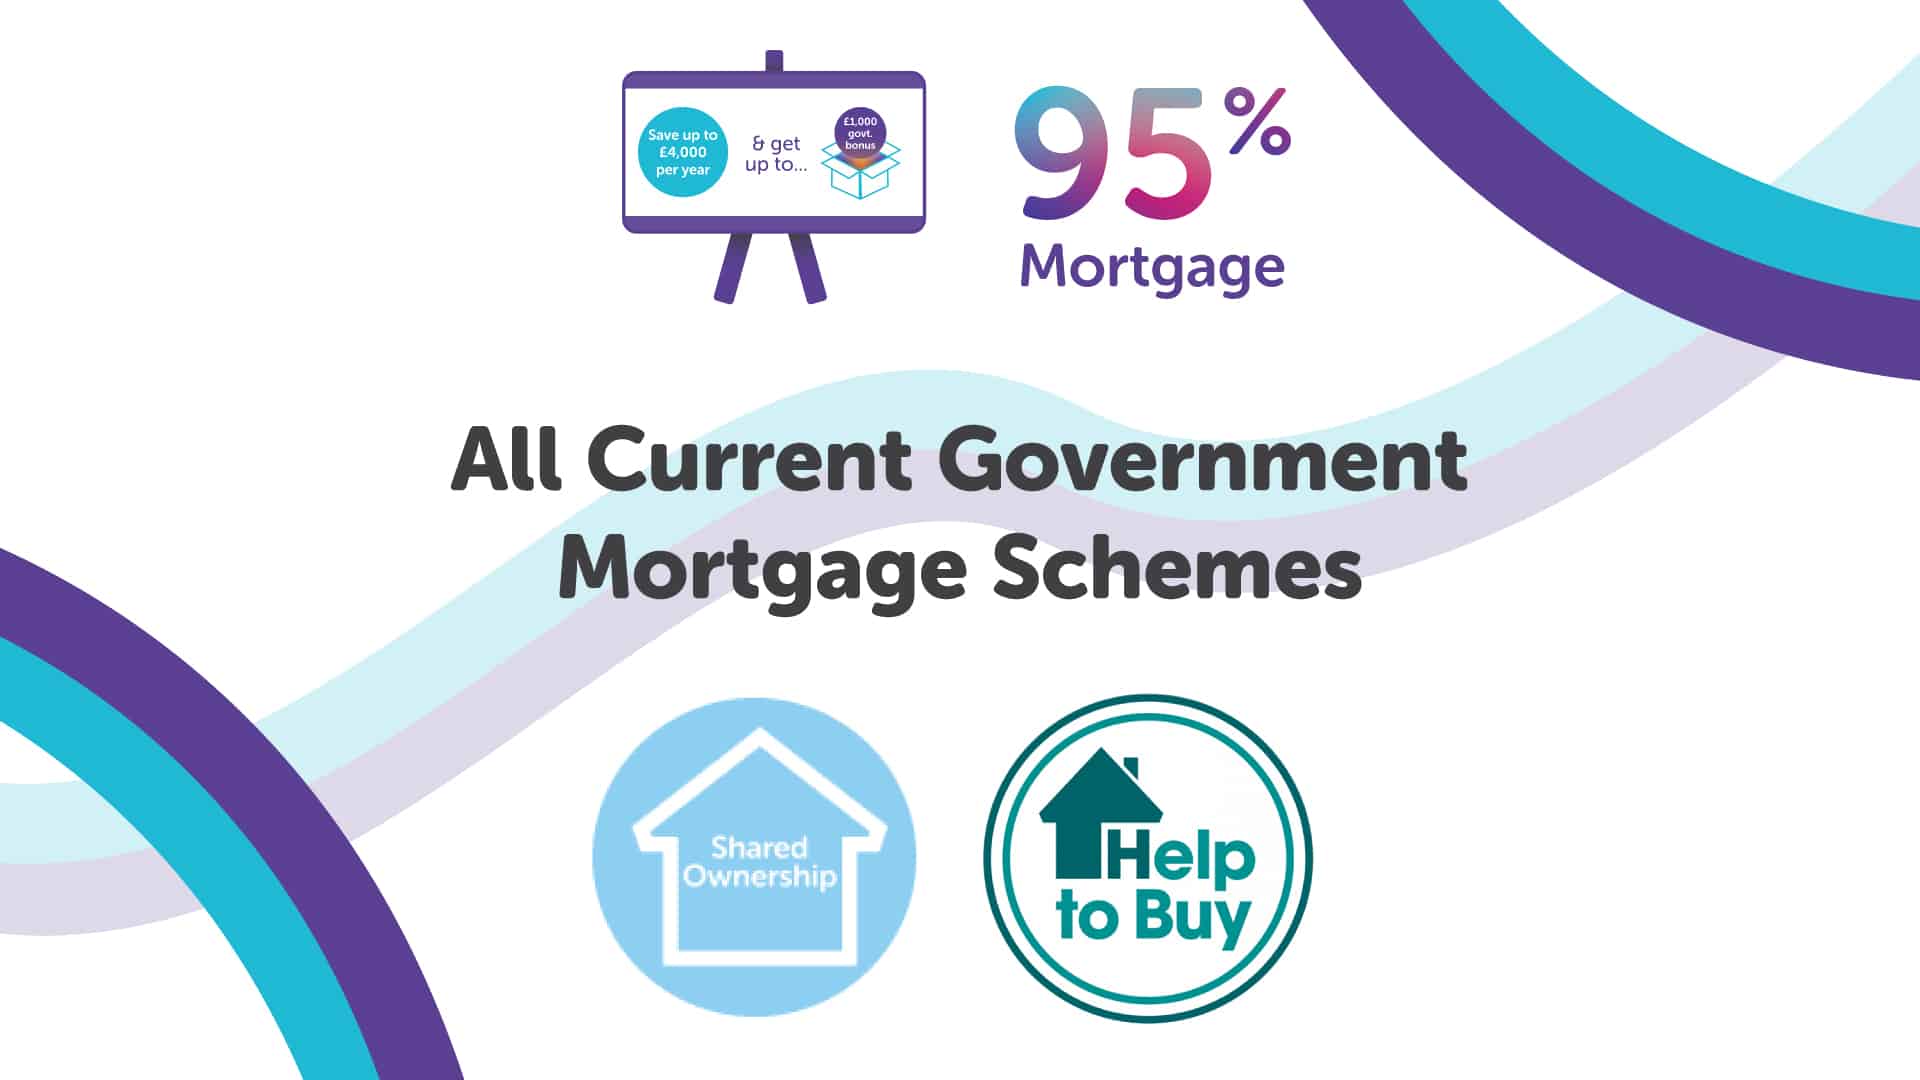 Different Help to Buy Mortgage Schemes in Manchester